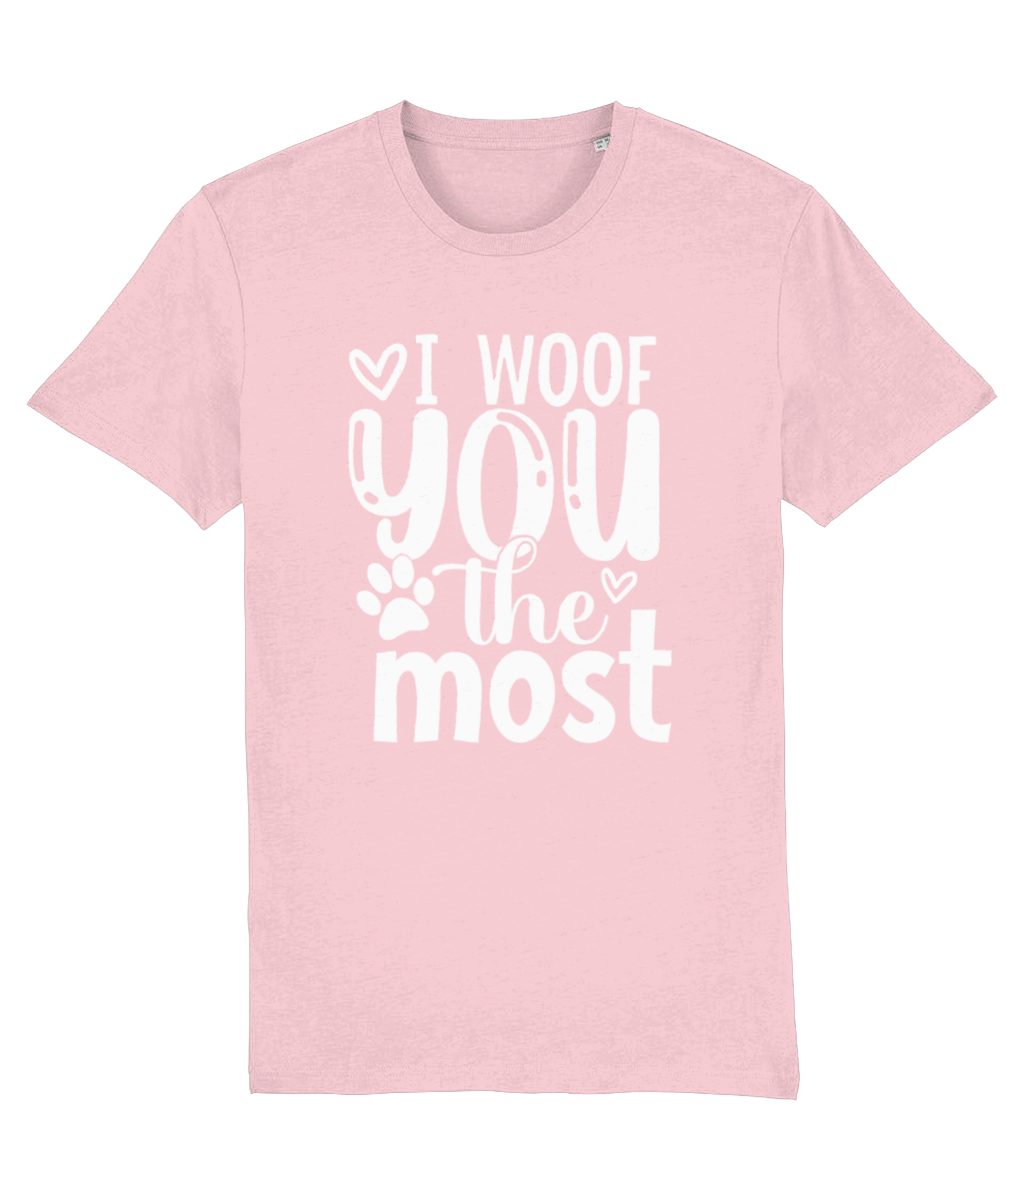 Honden T-shirt I woof you the most (quote hond)